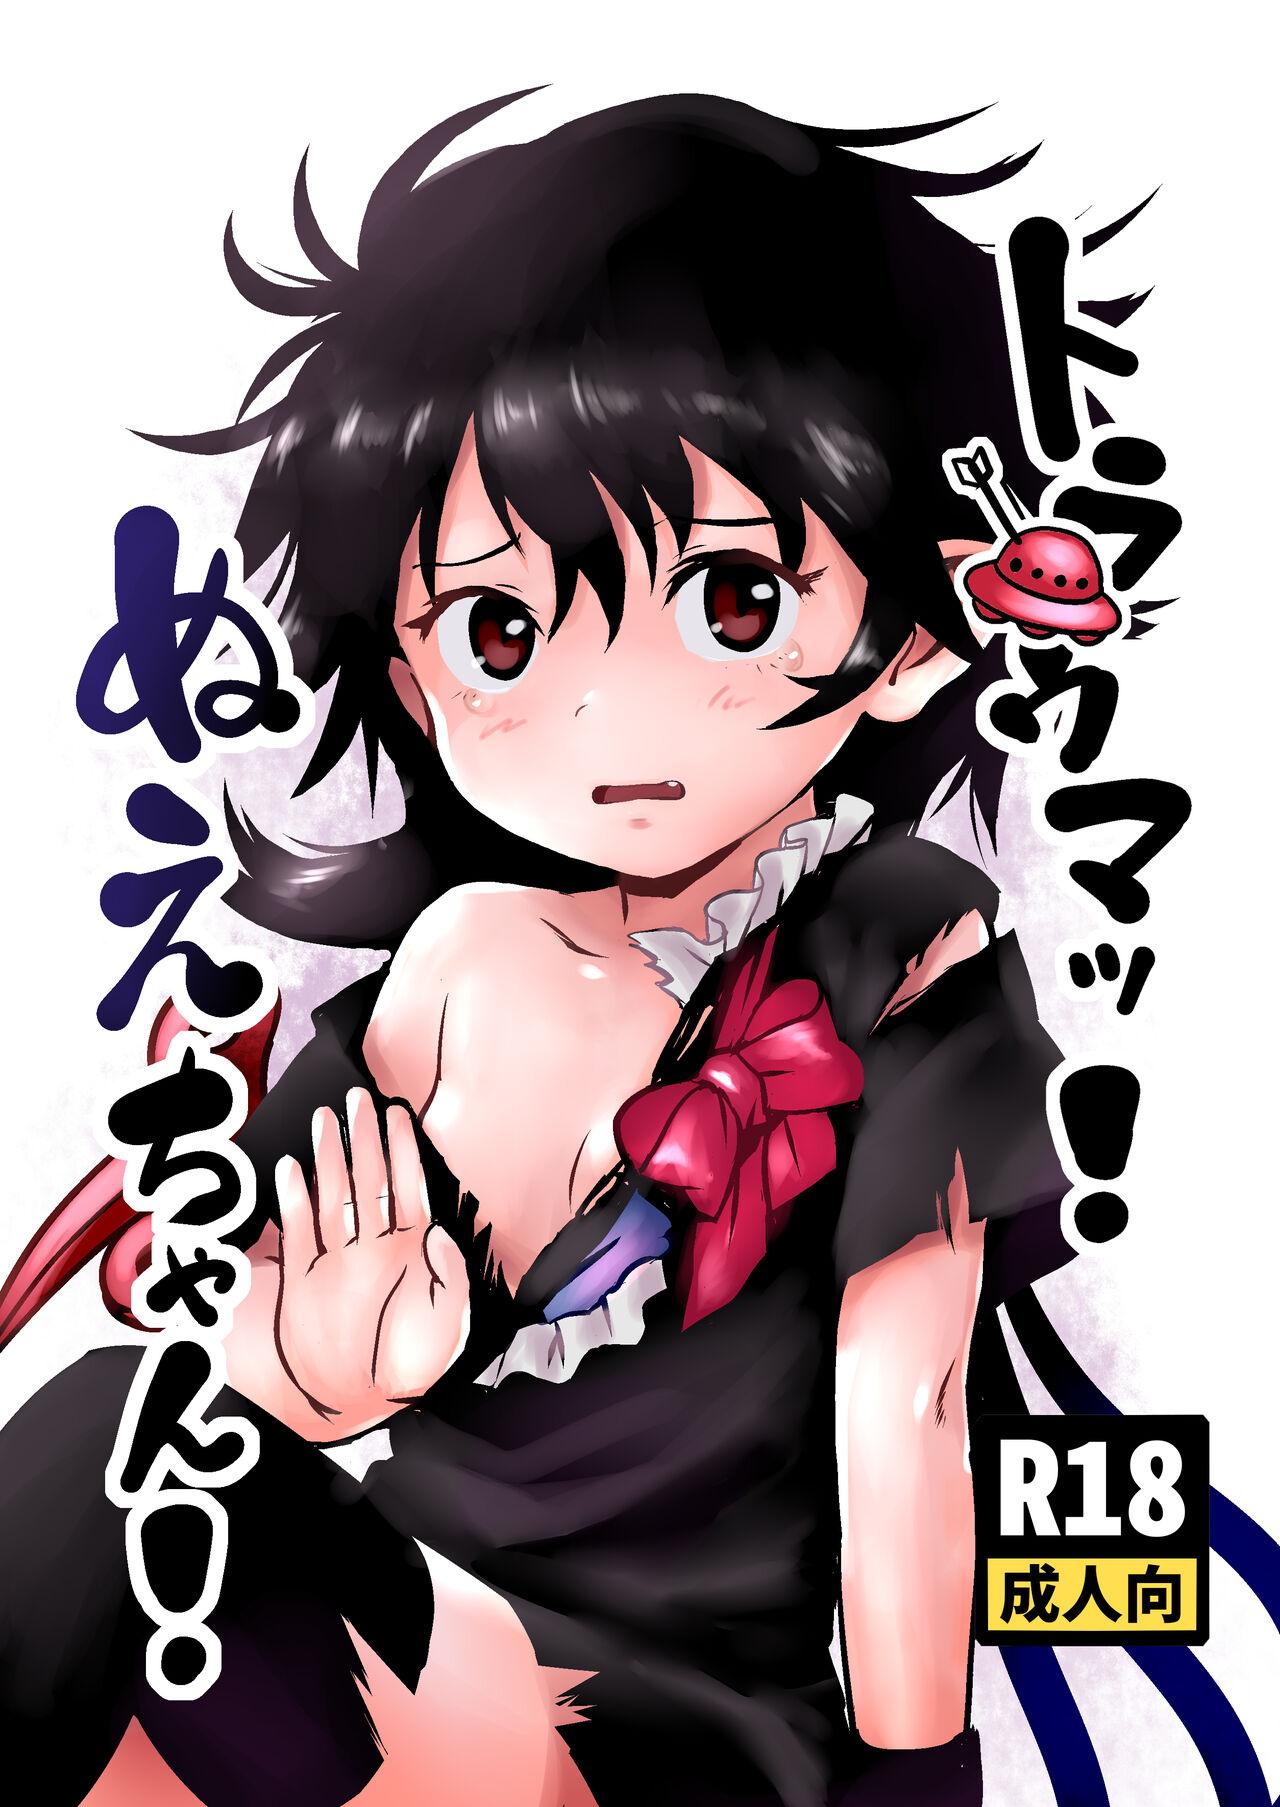 Morena Trauma! Nue-chan! - Touhou project Shoes - Picture 1